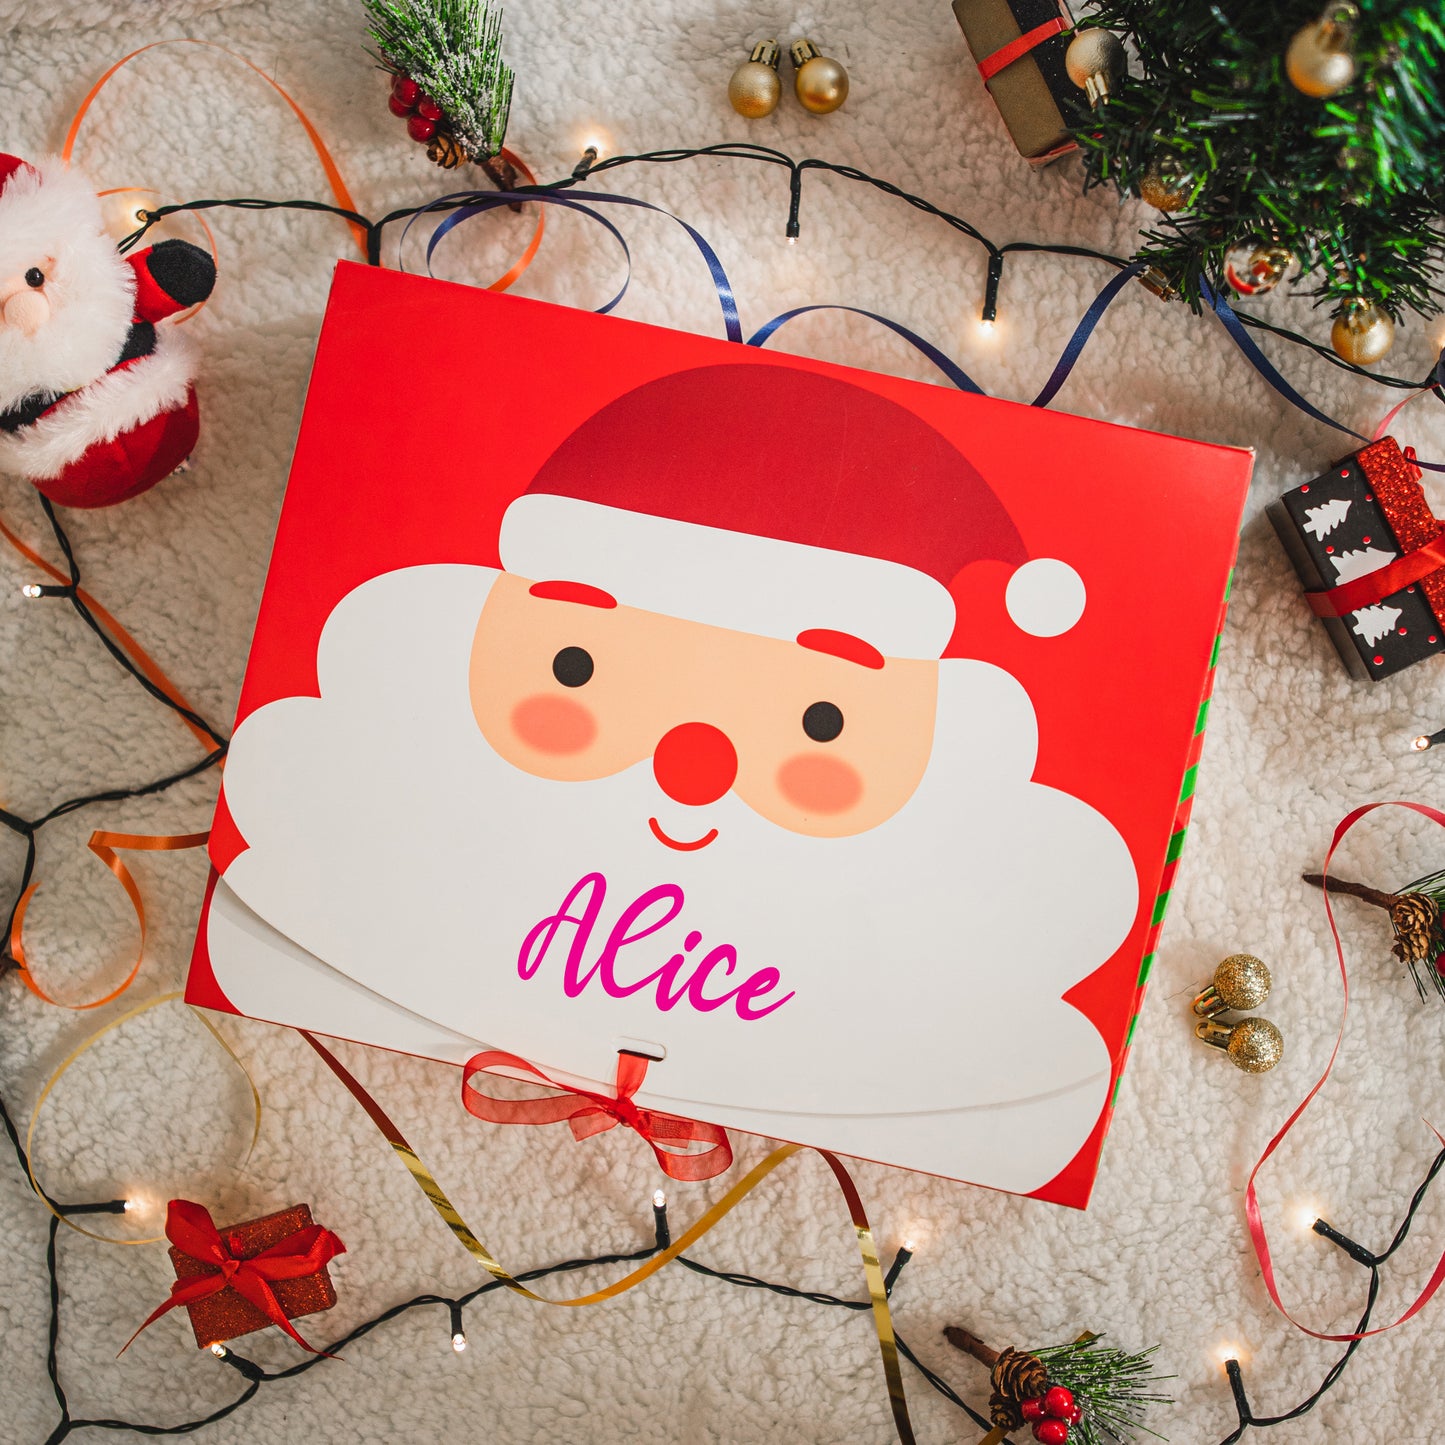 Personalised Christmas Eve Box Filled with Activities and Fun for Kids  - Always Looking Good -   